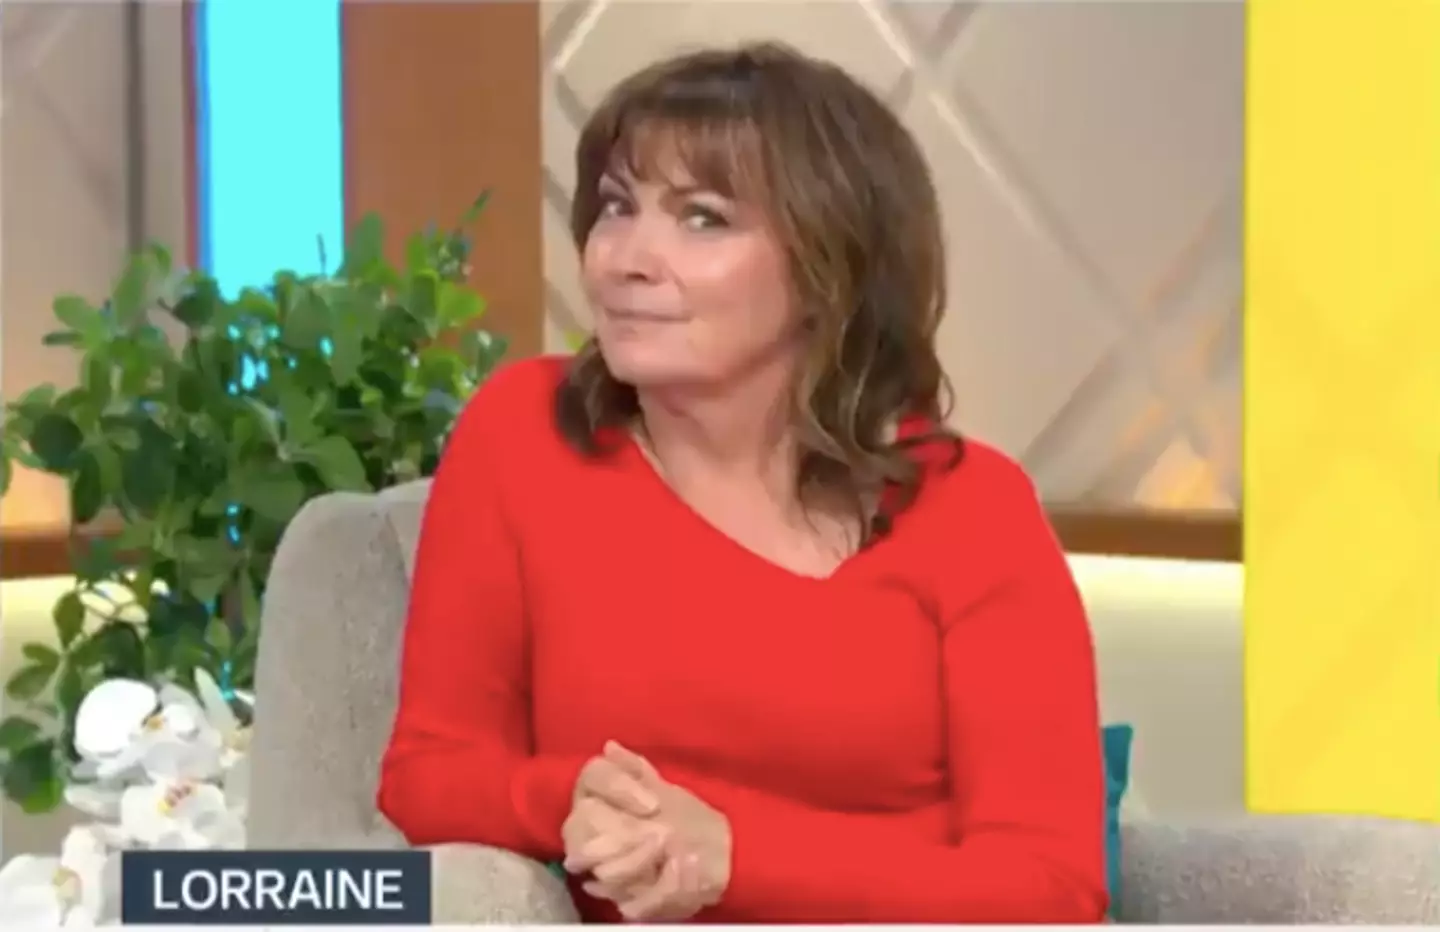 Brooklyn won't be a guest on Lorraine's show any time soon (